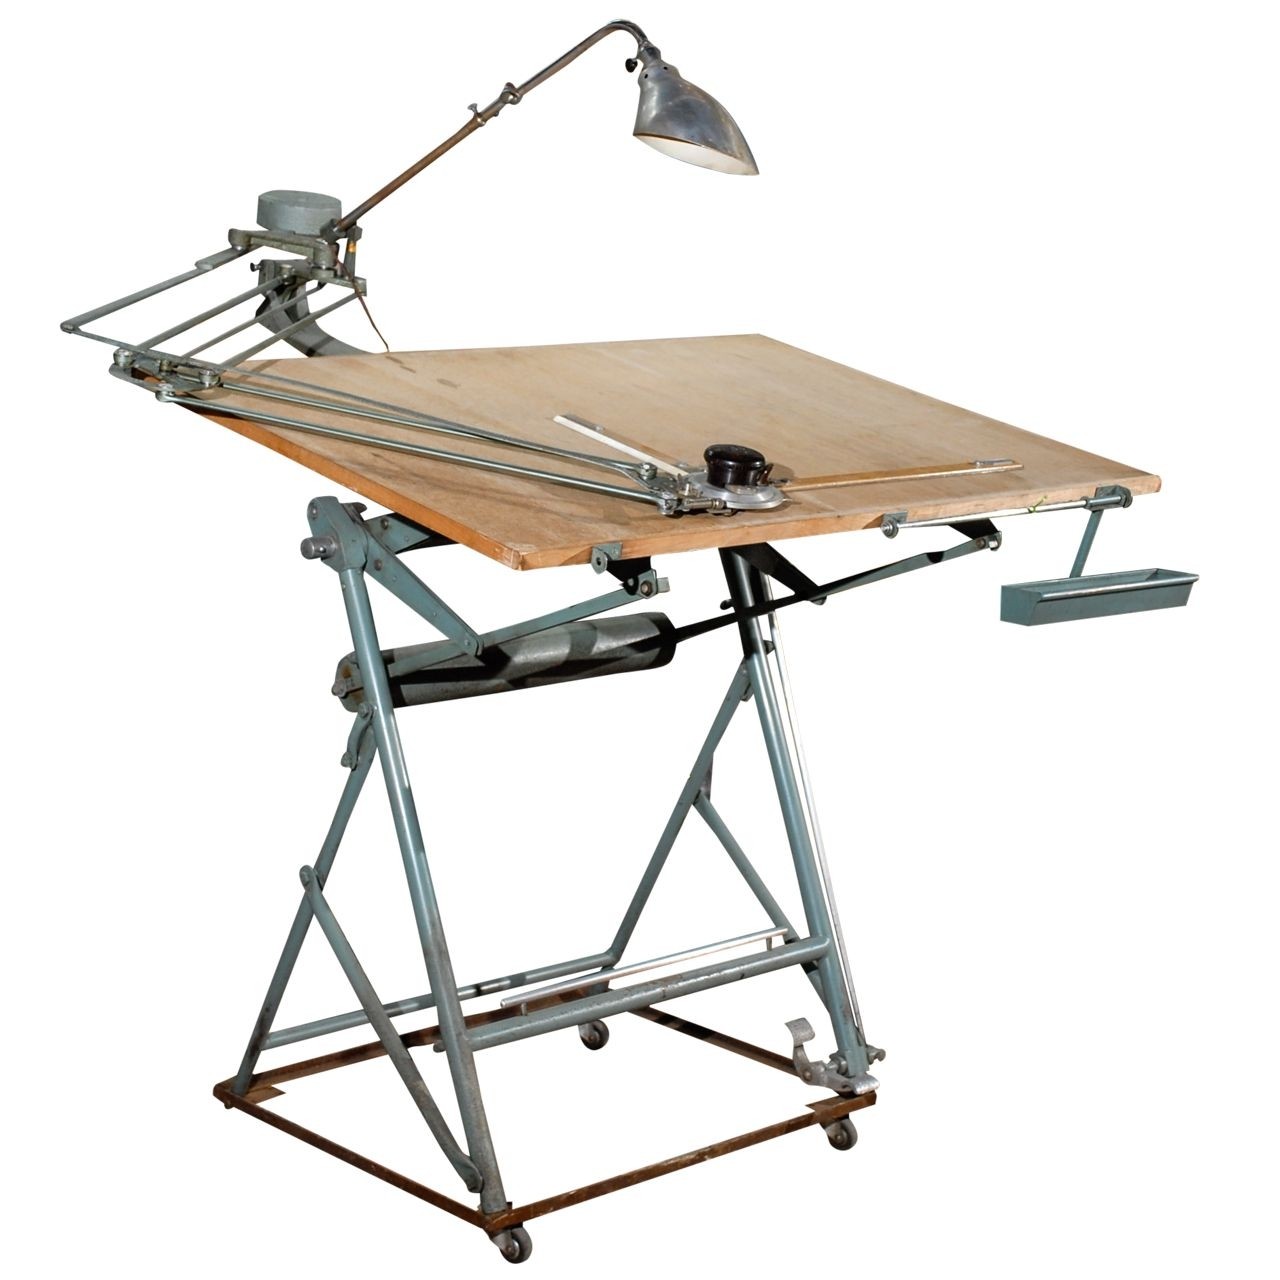 Isis drafting table with original components from a unique collection